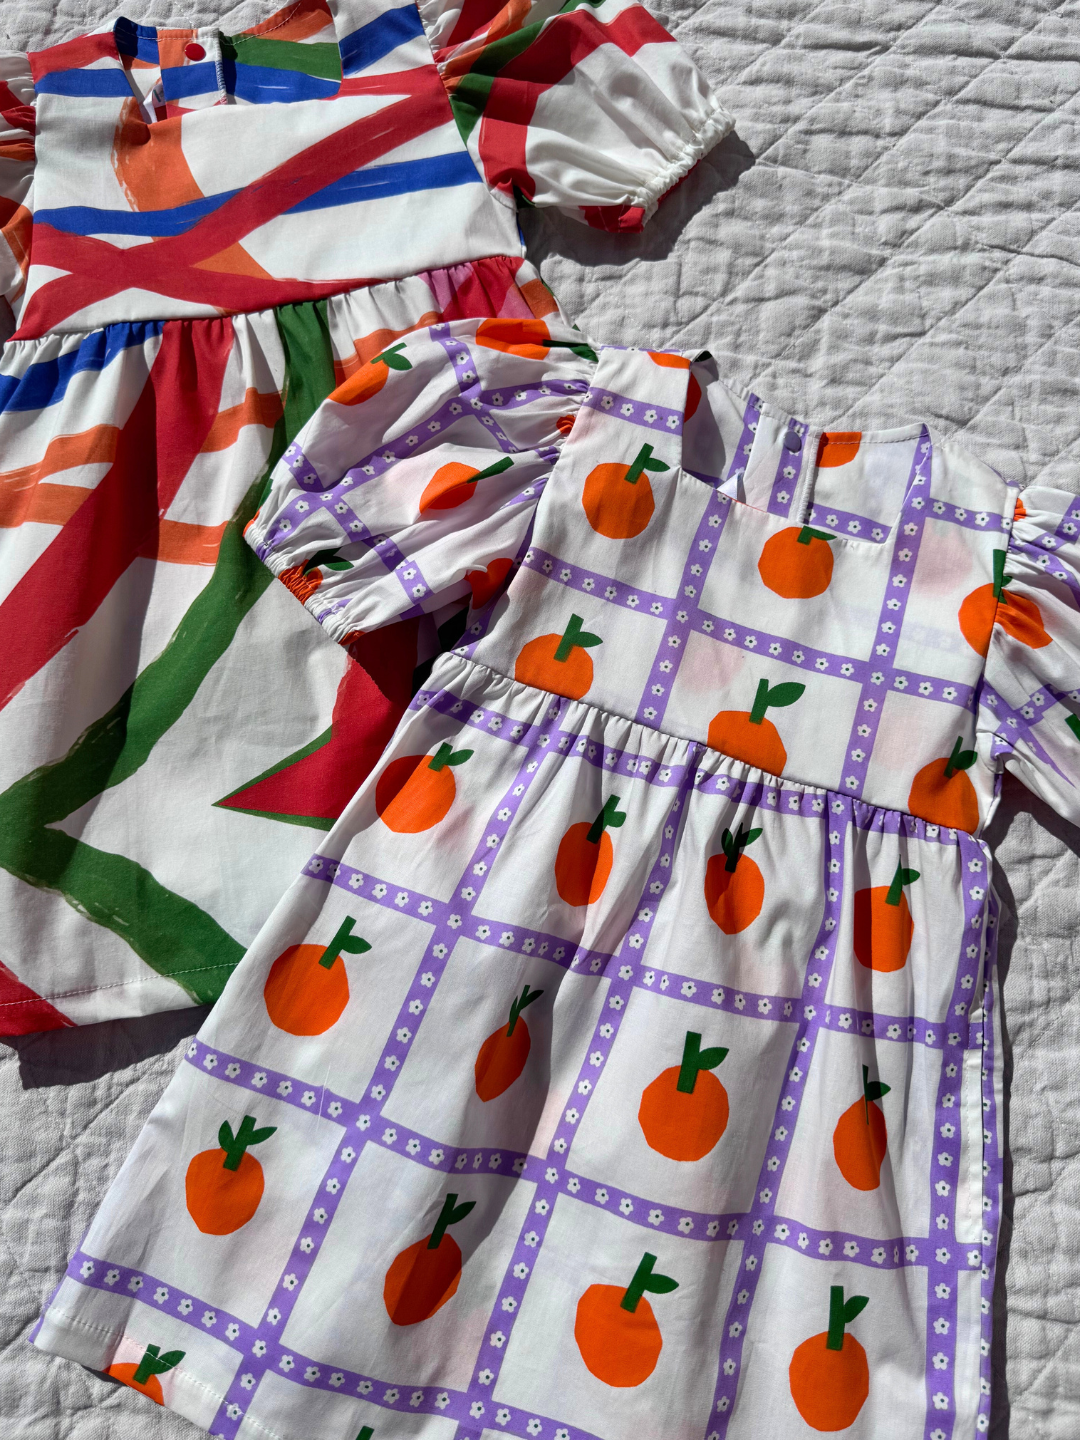 Oranges | A close up of the kid's Glow dress with an all-over oranges print and colors print laid plat on quilt